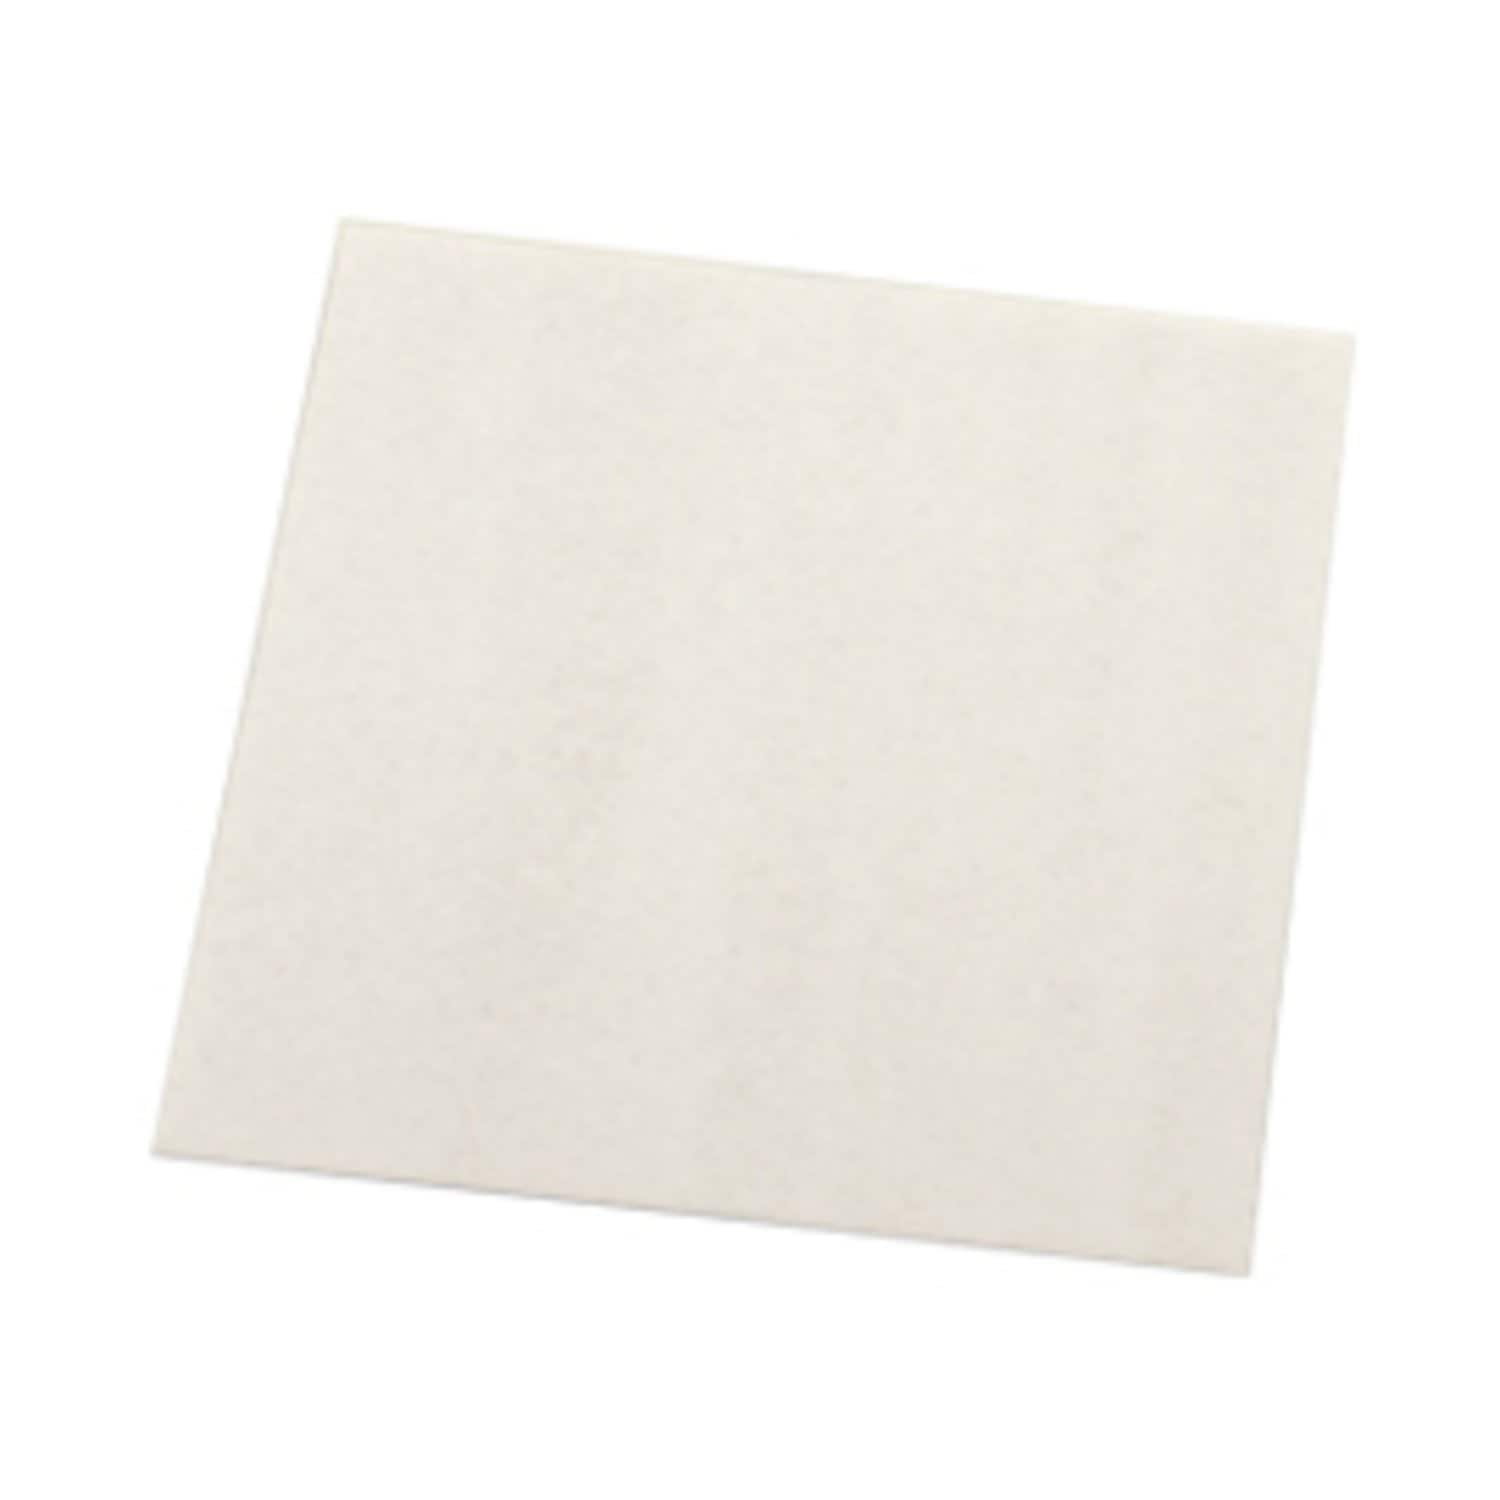 7100203383 - 3M 5500H-20 Thermally conductive acrylic pad, white, 240mm x 15m, 2mm